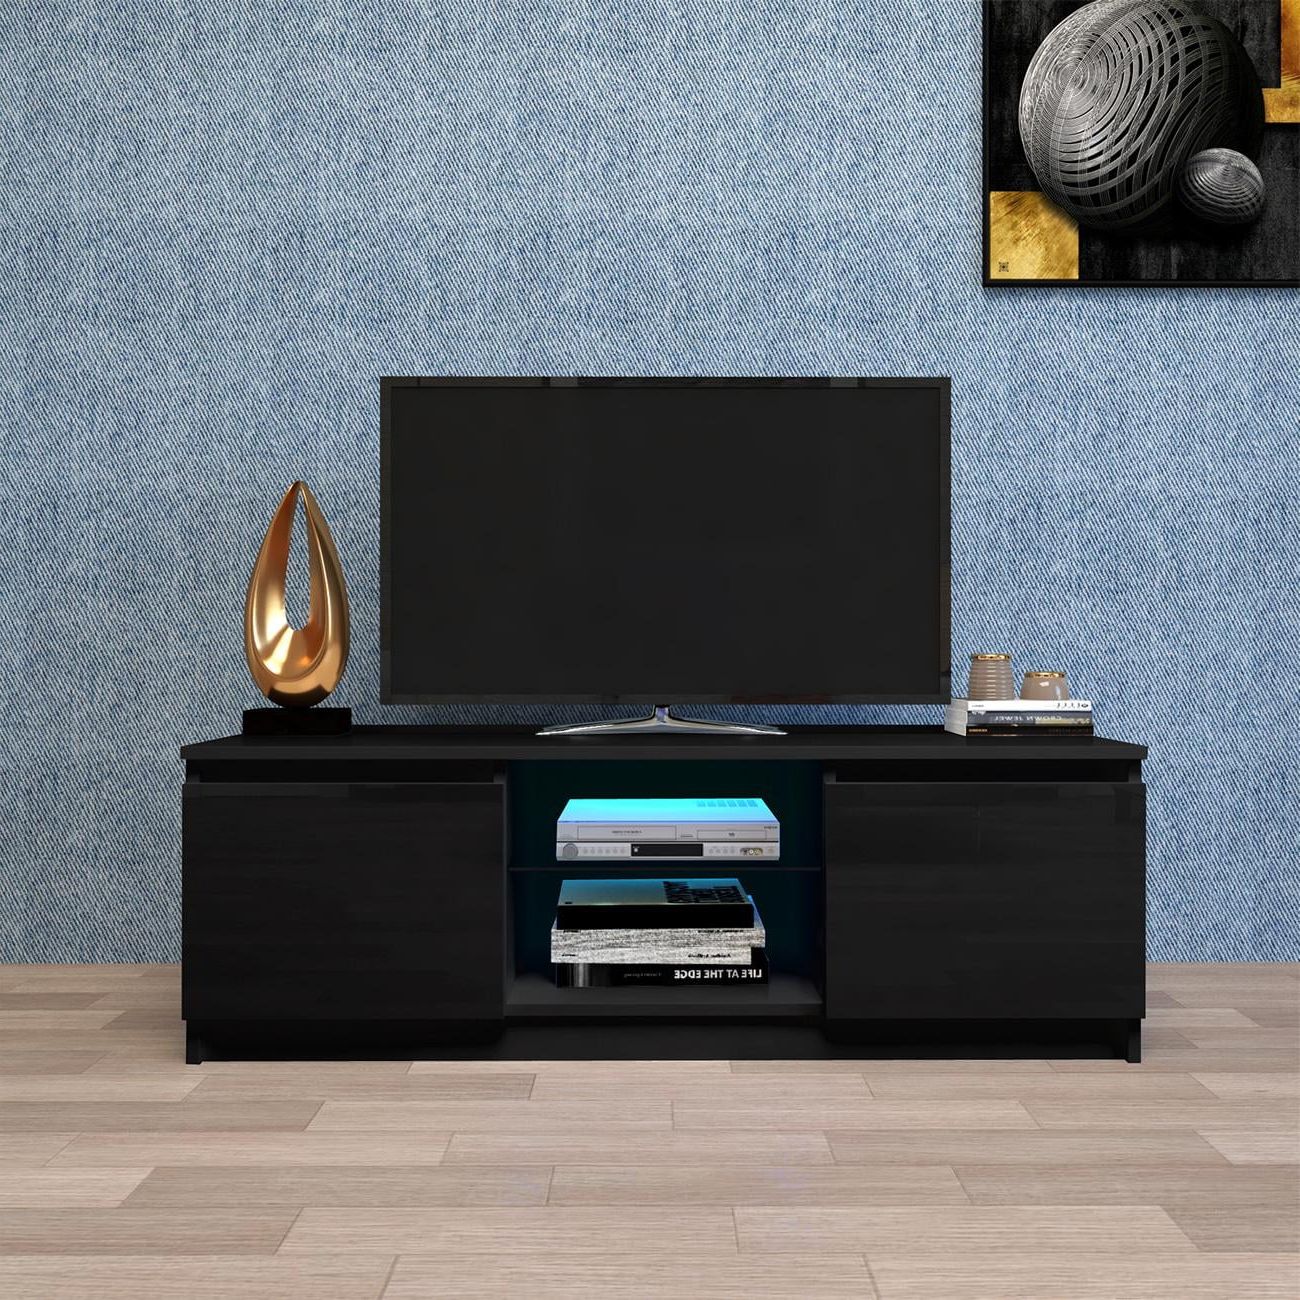 Tv Stand With Storage Drawers Shelves Led Rgb Lights, For Flat Tv 40 55 Within Most Popular Black Rgb Entertainment Centers (View 3 of 15)